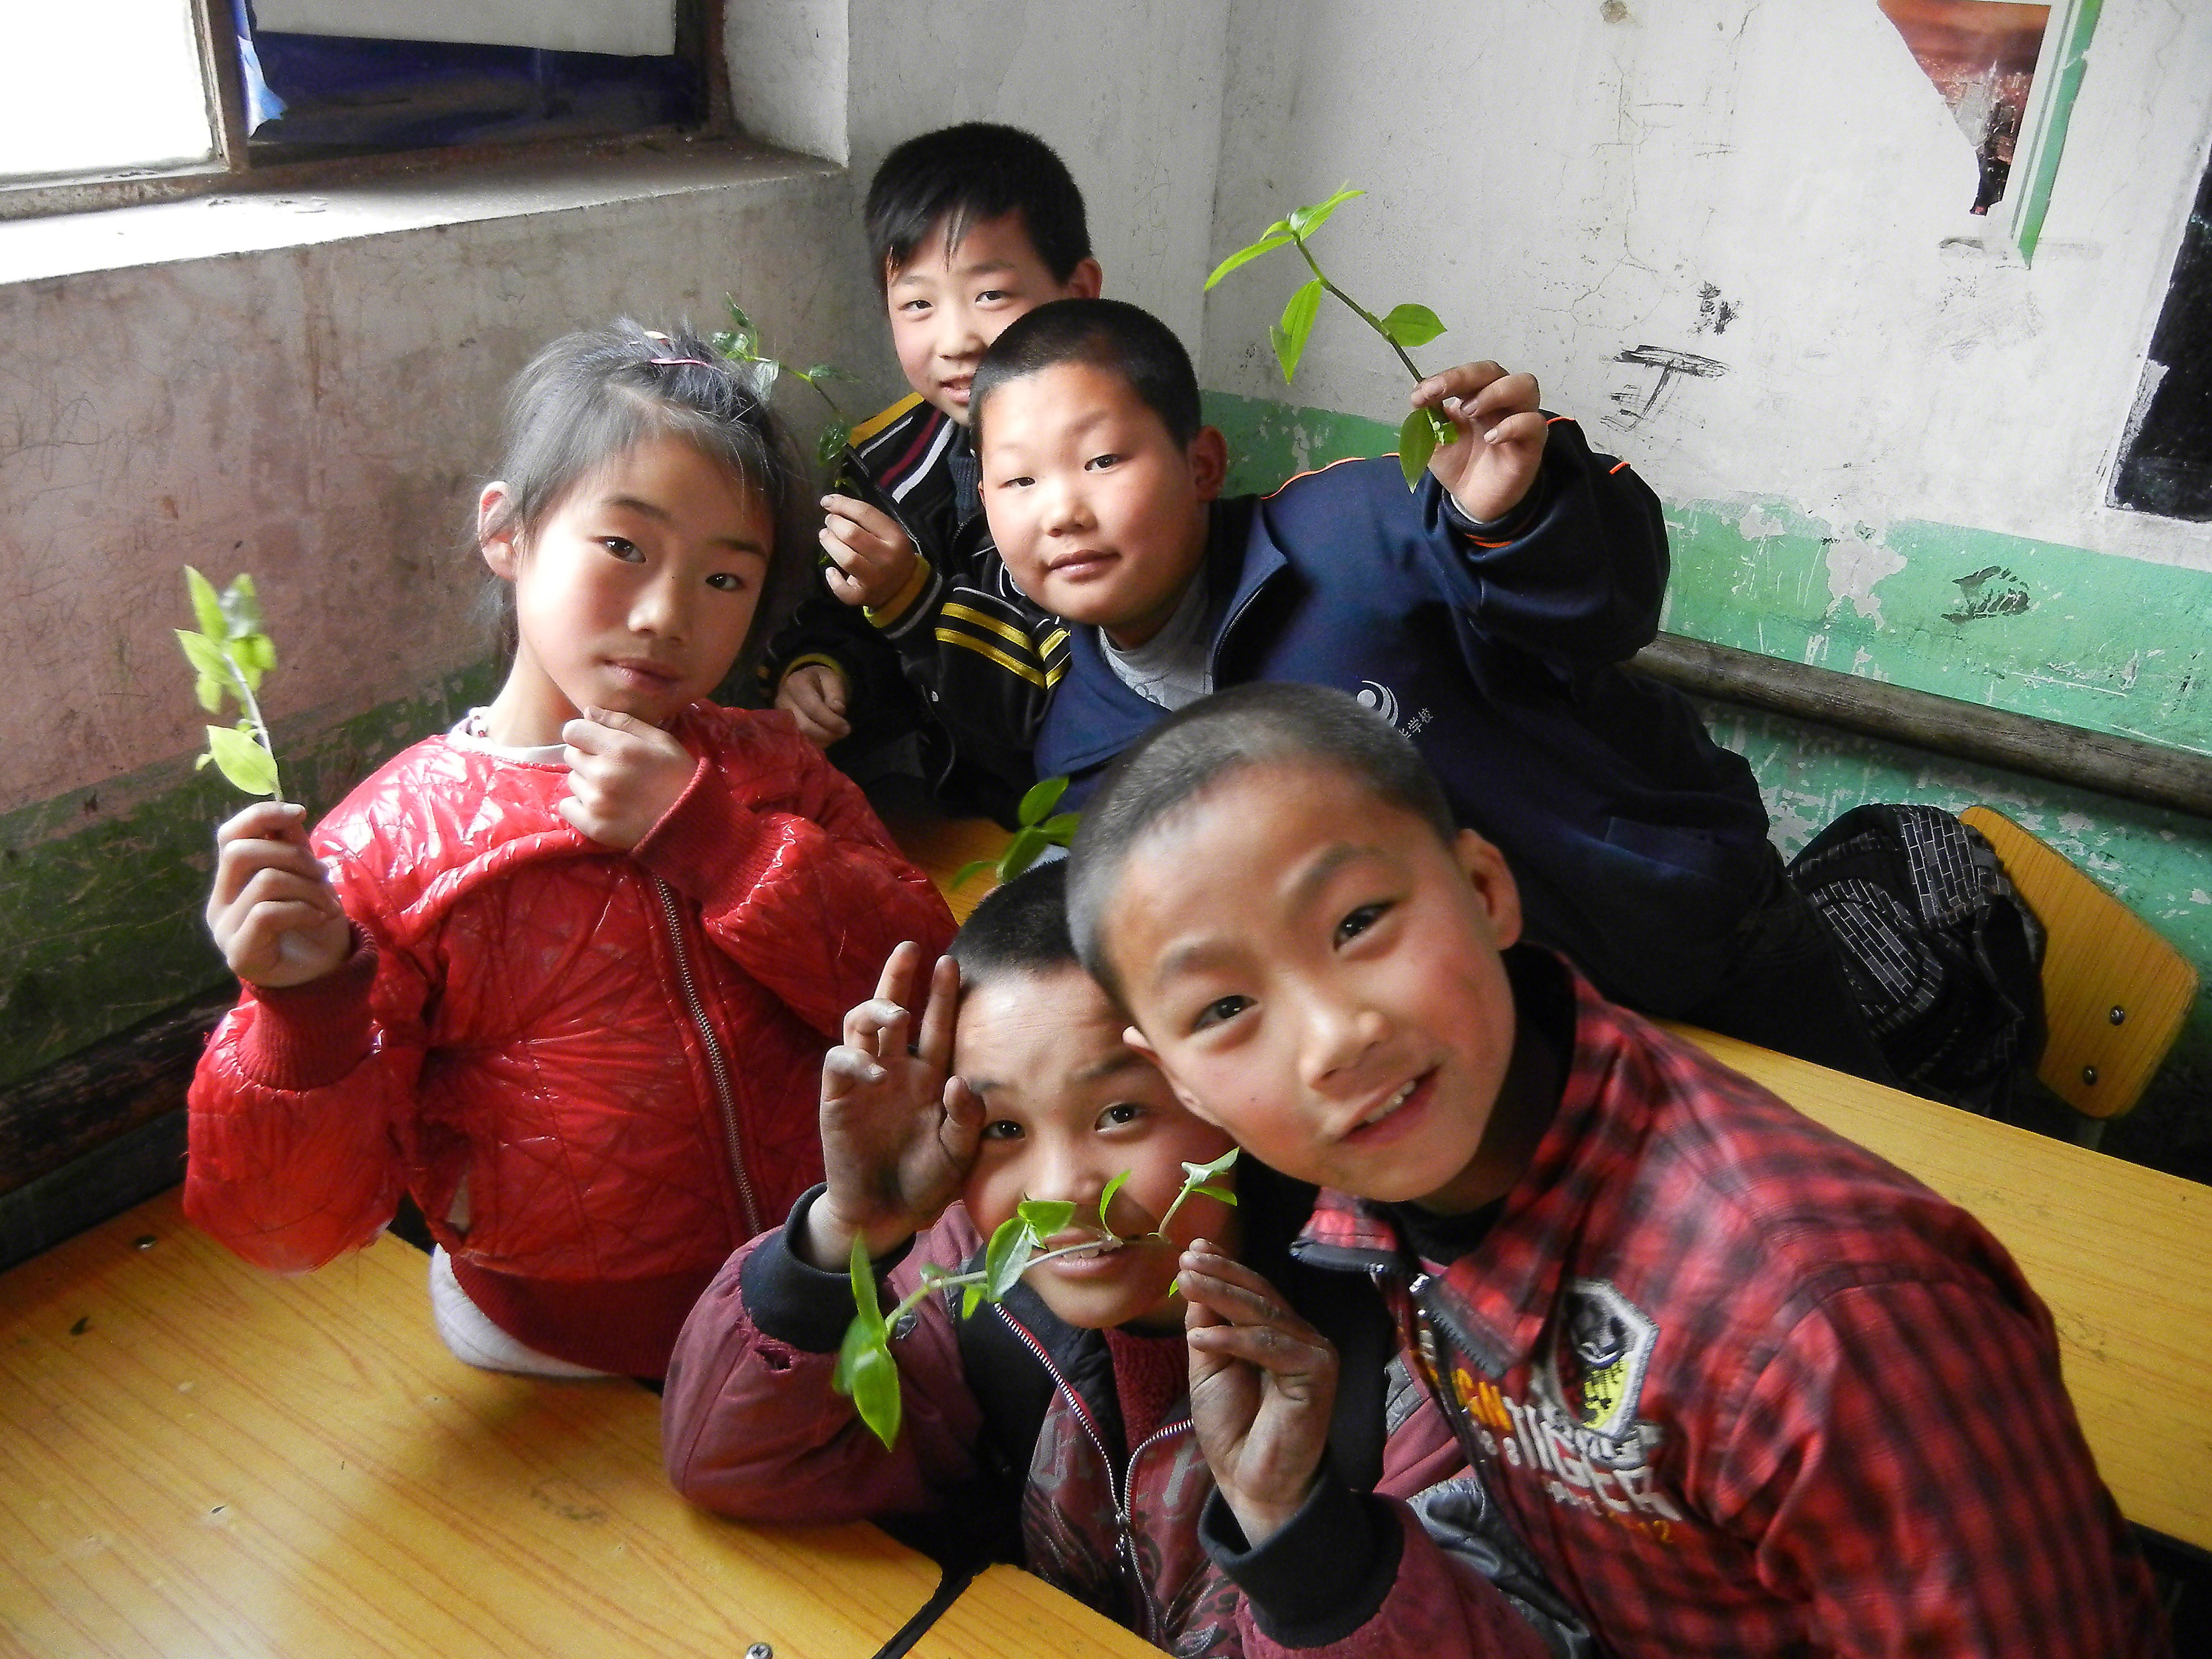 Migrant children learn about plants in a class on the environment. Even though Chinese law mandates all migrant children be given access to education, some schools impose additional requirements for them to enrol, in an effort to make access harder. Photo: JGI China